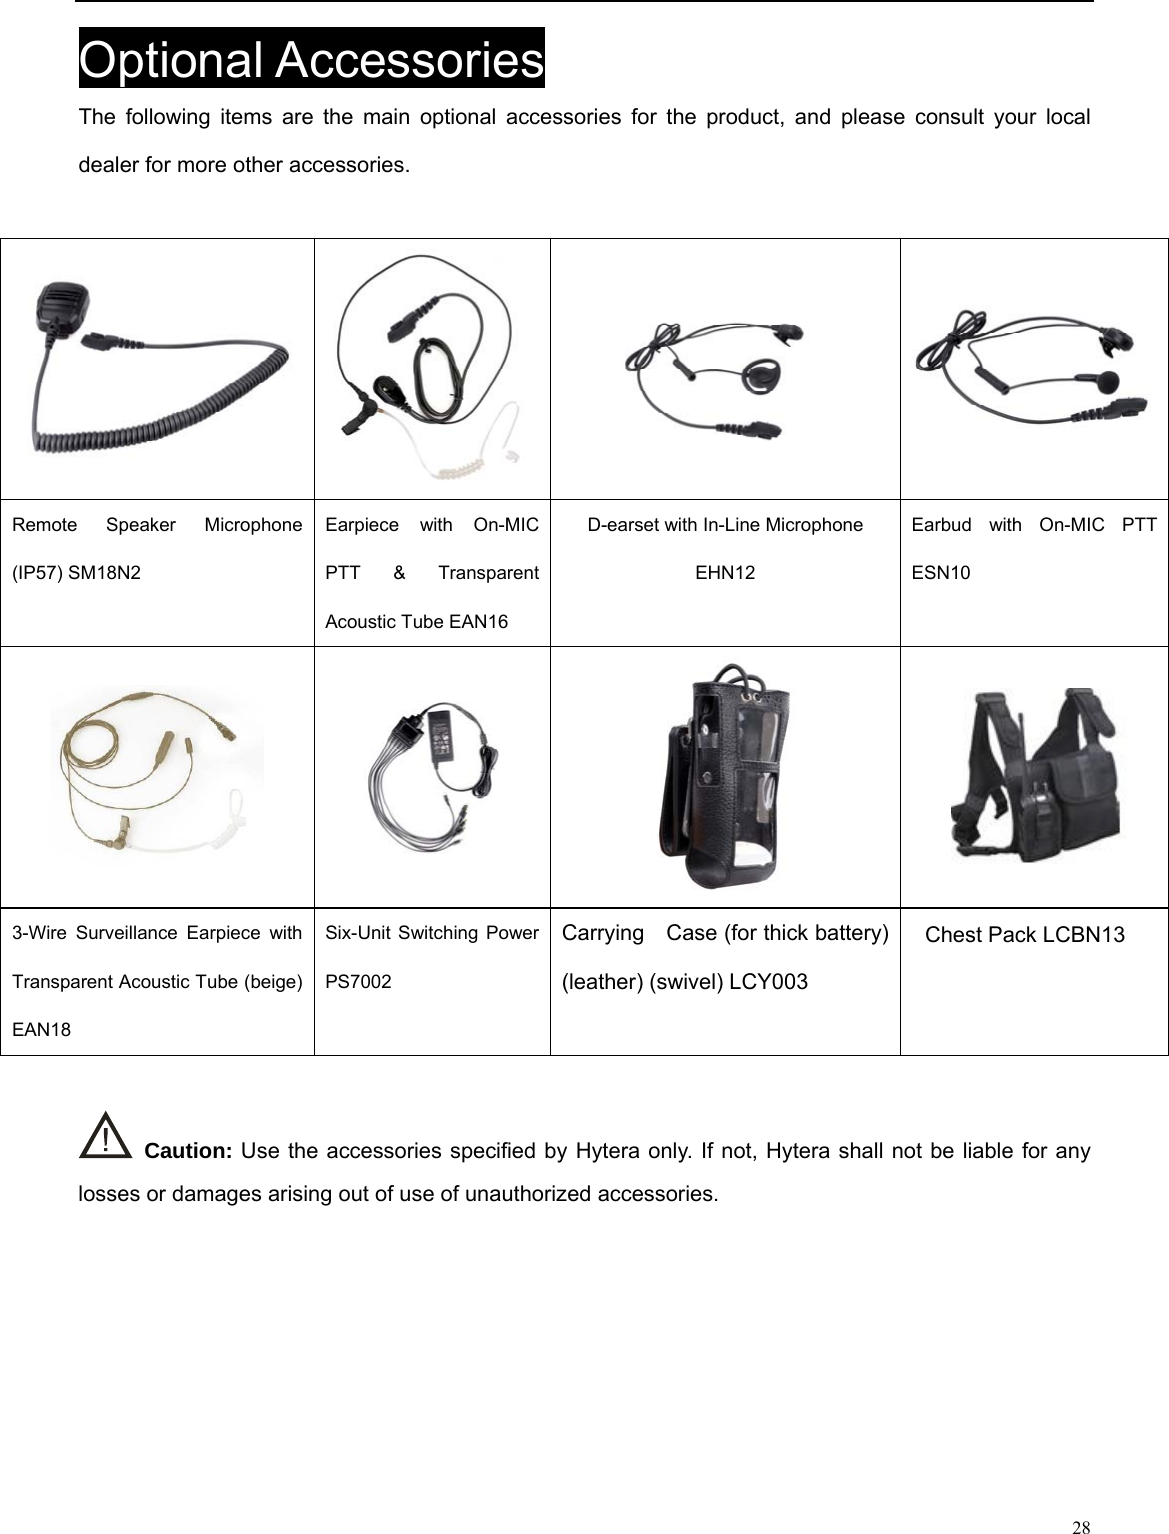                                                                                                            Optional Accessories The following items are the main optional accessories for the product, and please consult your local dealer for more other accessories.   Remote Speaker Microphone (IP57) SM18N2   Earpiece with On-MIC PTT &amp; Transparent Acoustic Tube EAN16   D-earset with In-Line Microphone EHN12 Earbud with On-MIC PTT ESN10       Carrying    Case (for thick battery) (leather) (swivel) LCY003 3-Wire Surveillance Earpiece with Transparent Acoustic Tube (beige) EAN18 Six-Unit Switching Power   PS7002    Caution: Use the accessories specified by Hytera only. If not, Hytera shall not be liable for any losses or damages arising out of use of unauthorized accessories.      28 Chest Pack LCBN13 